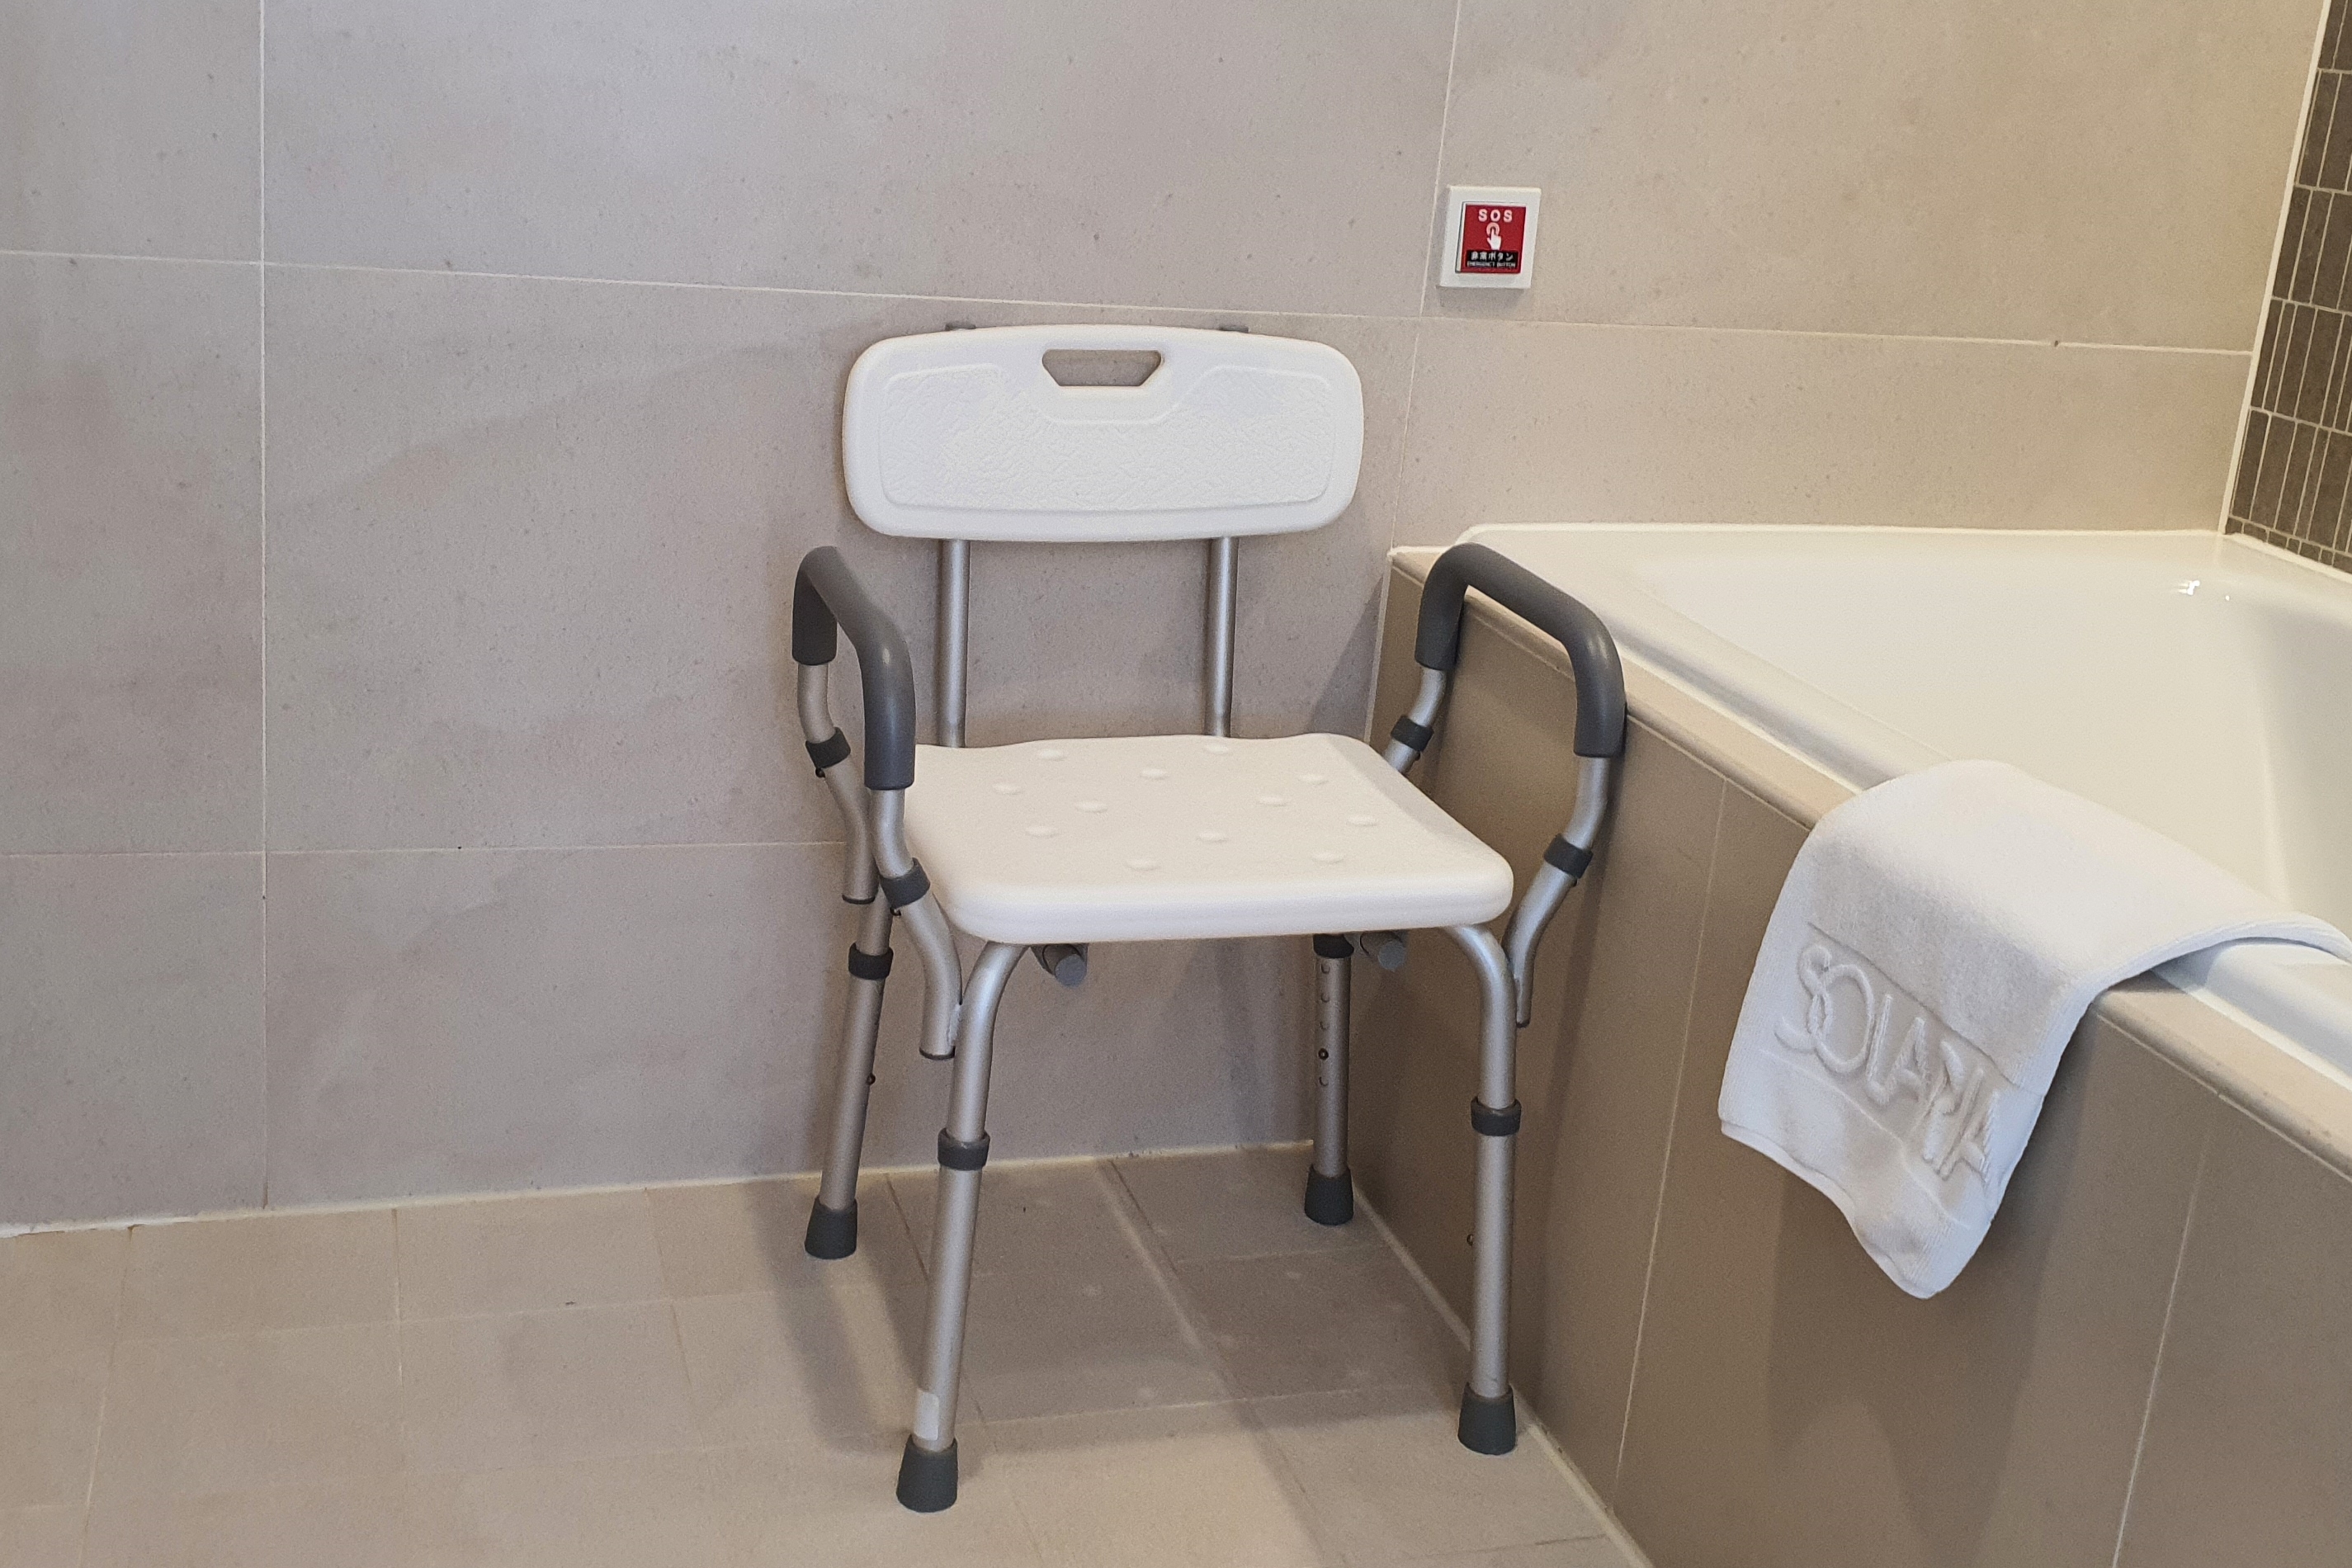 Bathroom in the guestroom0 : Shower chair in the bathroom